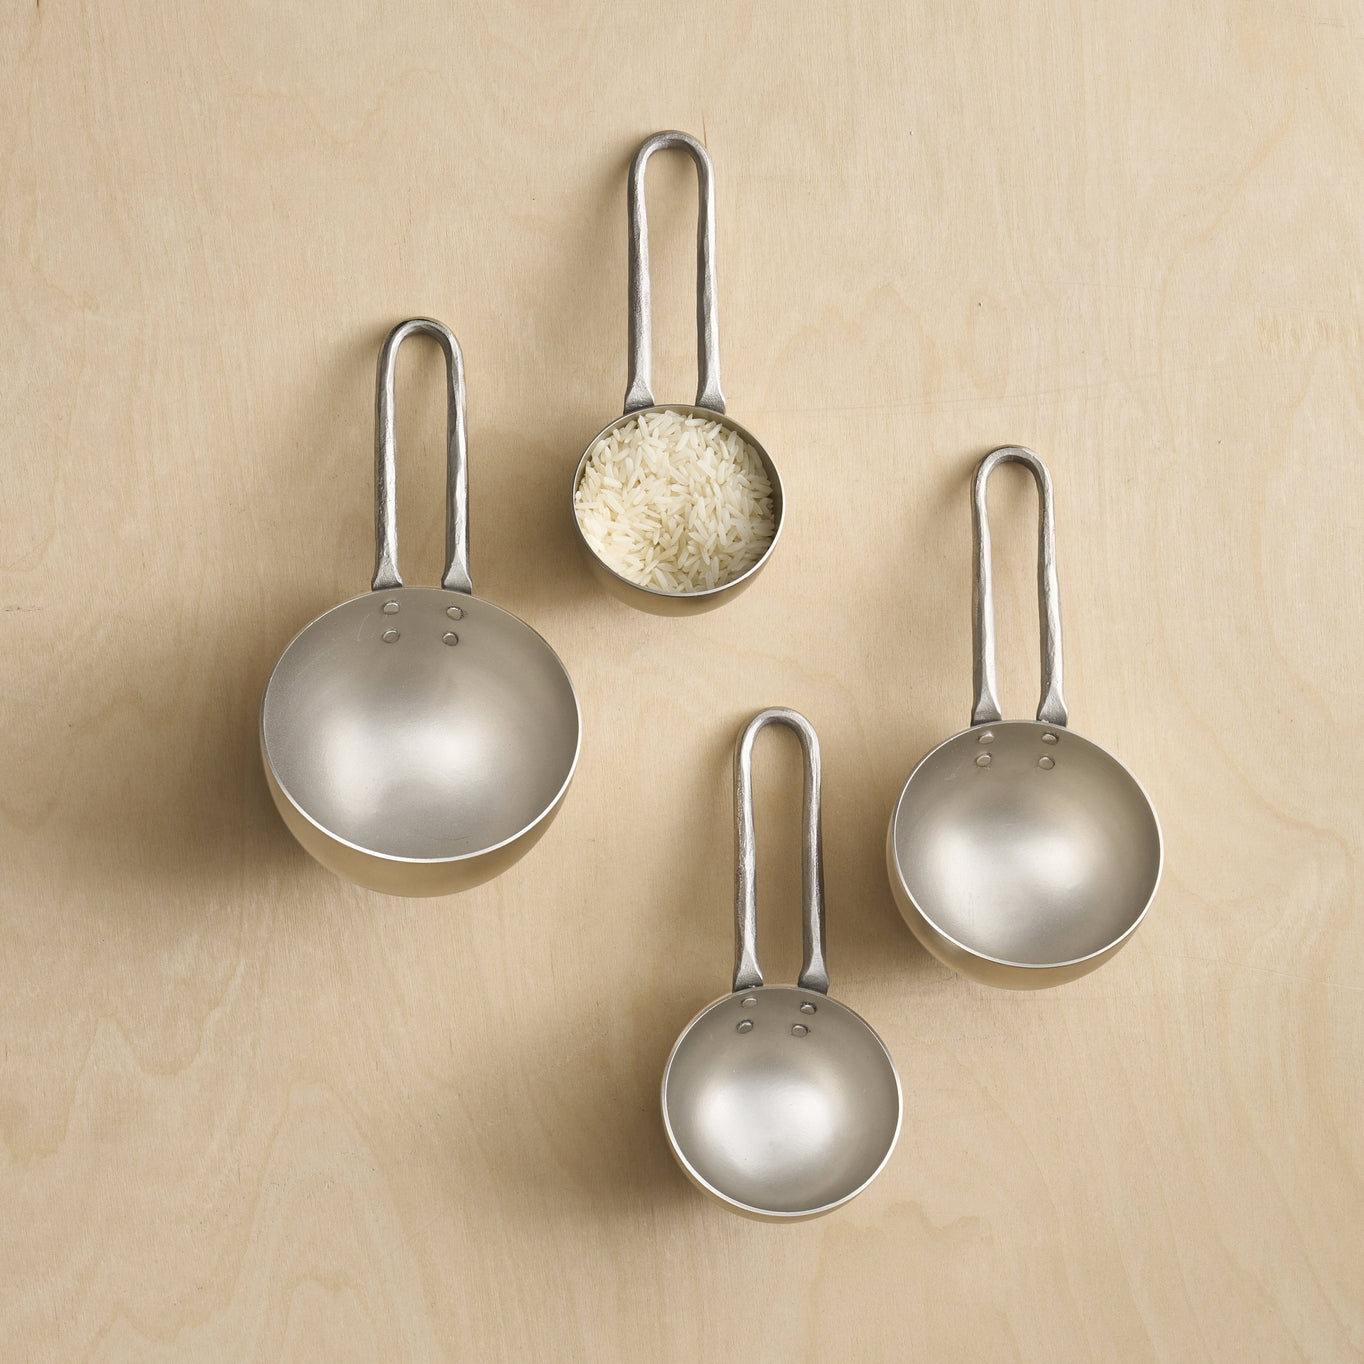 Deep, half-sphere scoops feature smooth, shiny exteriors and brushed interiors for an overall modern look of mixed textures and tones. Handles are forged of mild steel, giving them a hammered texture. Each scoop shows its capacity stamped on the side, from 1/4 cup up to 1 cup.